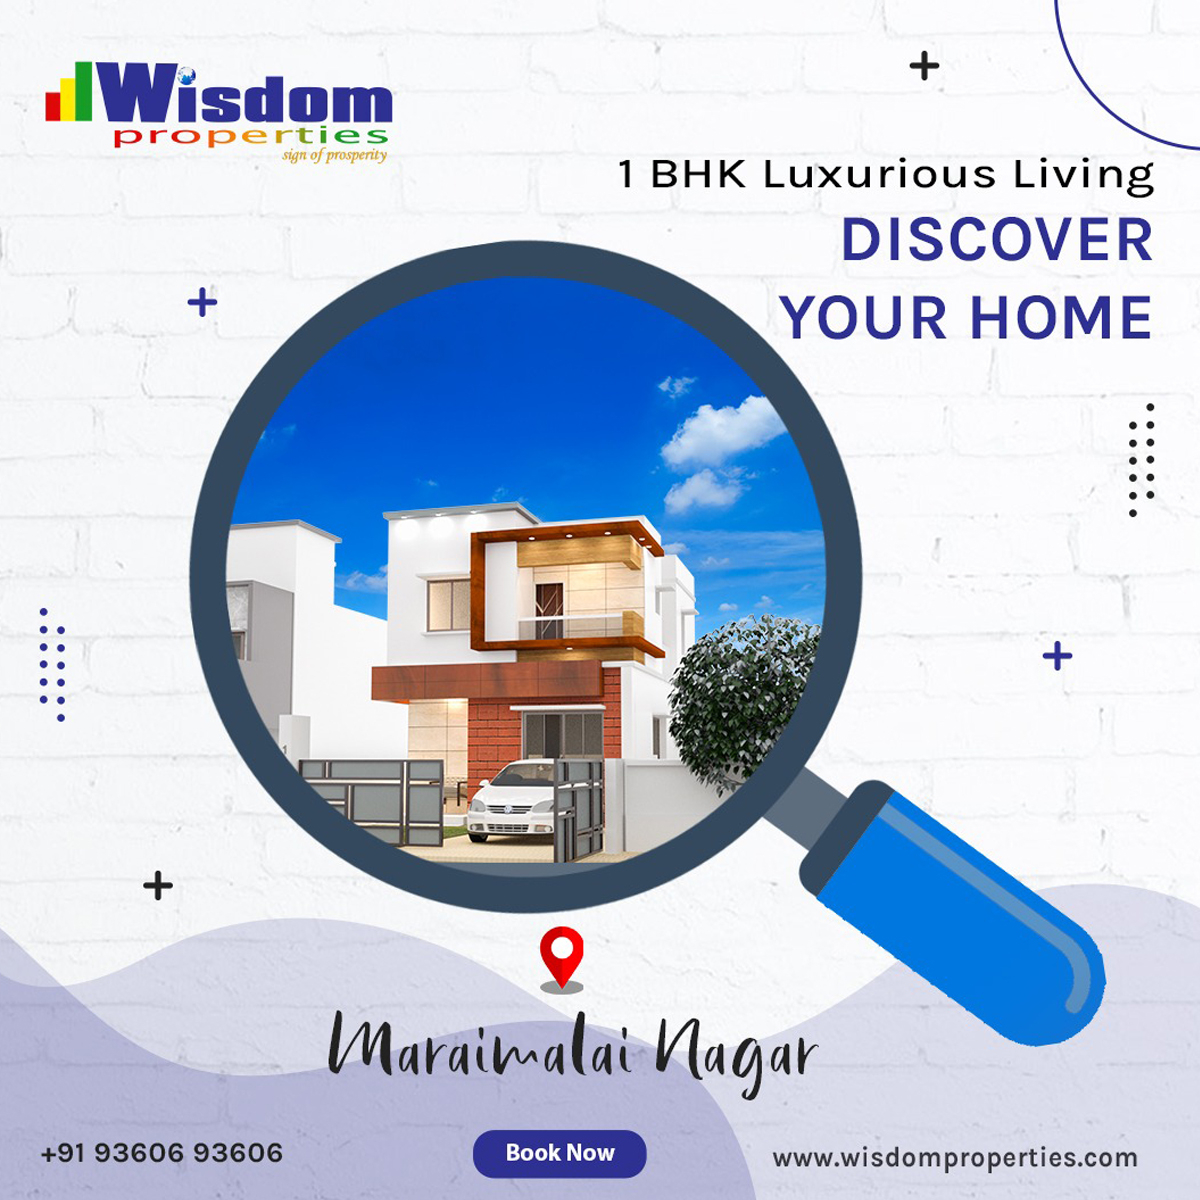 1 BHK Luxurious Living Discover Your Home